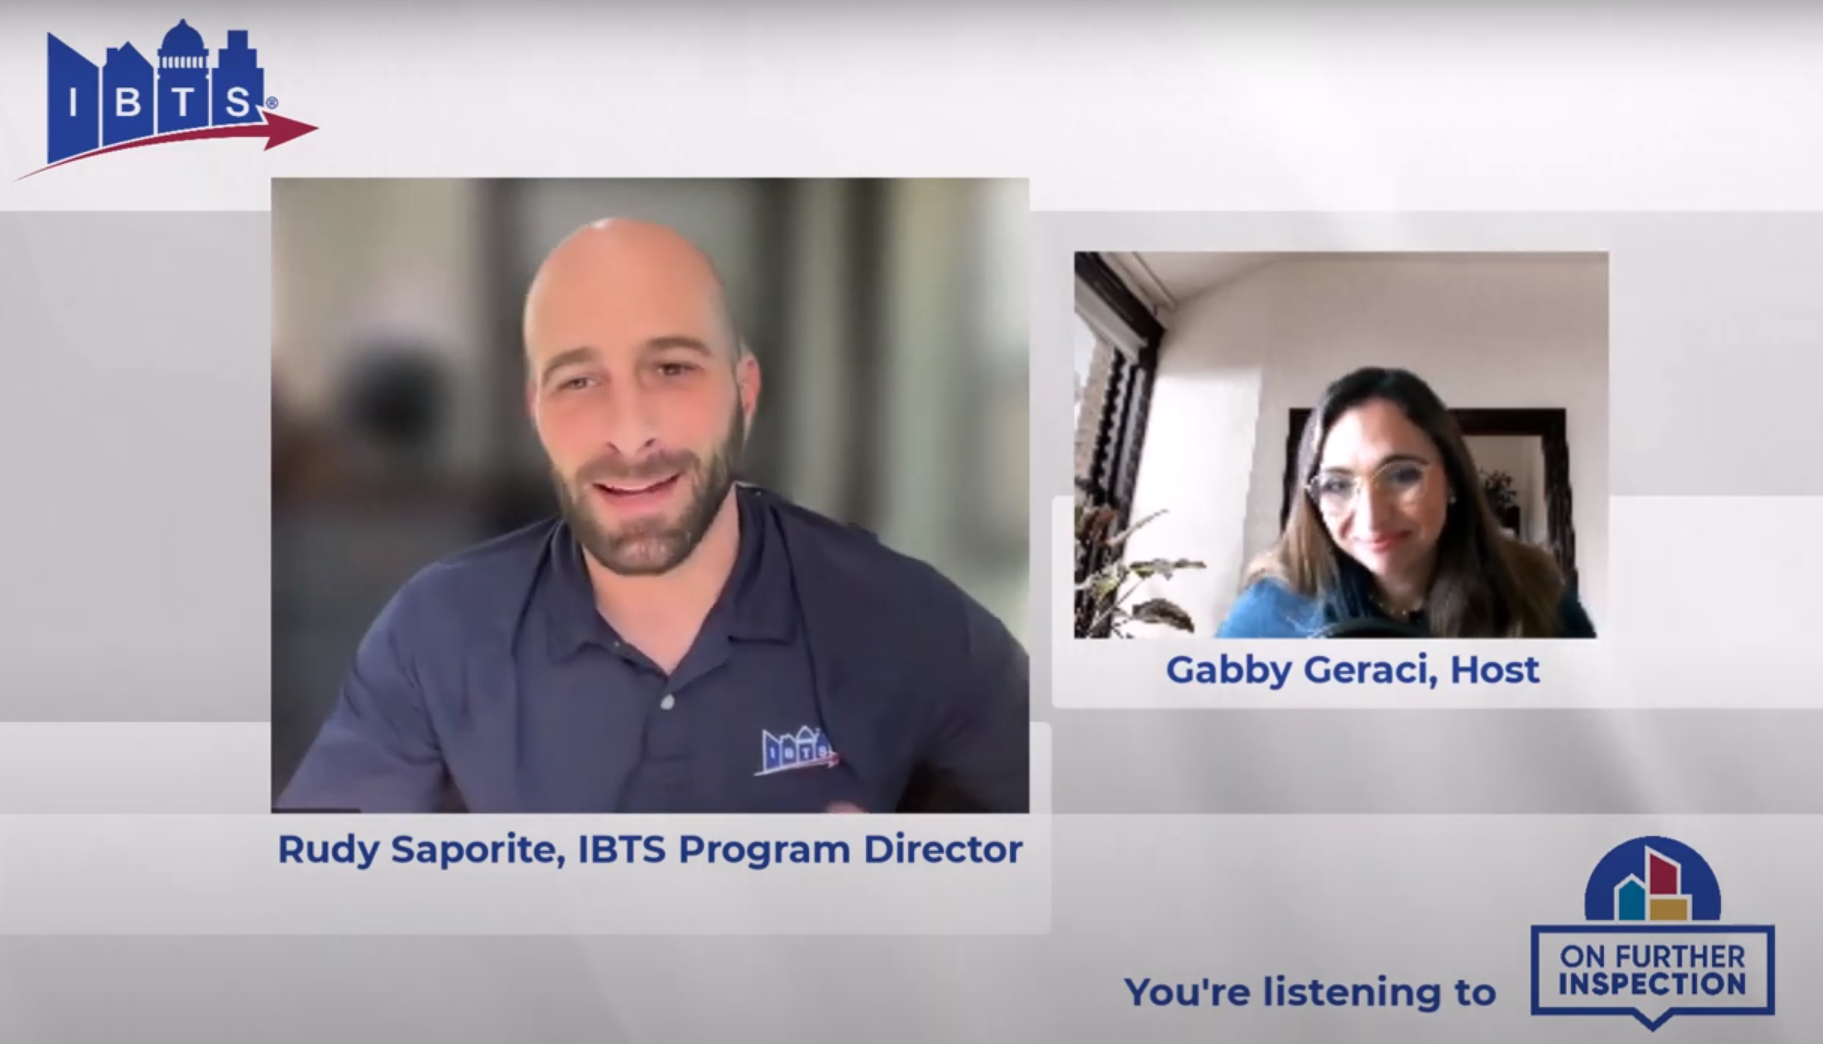 Rudy Saporite, IBTS Program Director, and Gabby Geraci, Host, are featued in a screenshot.